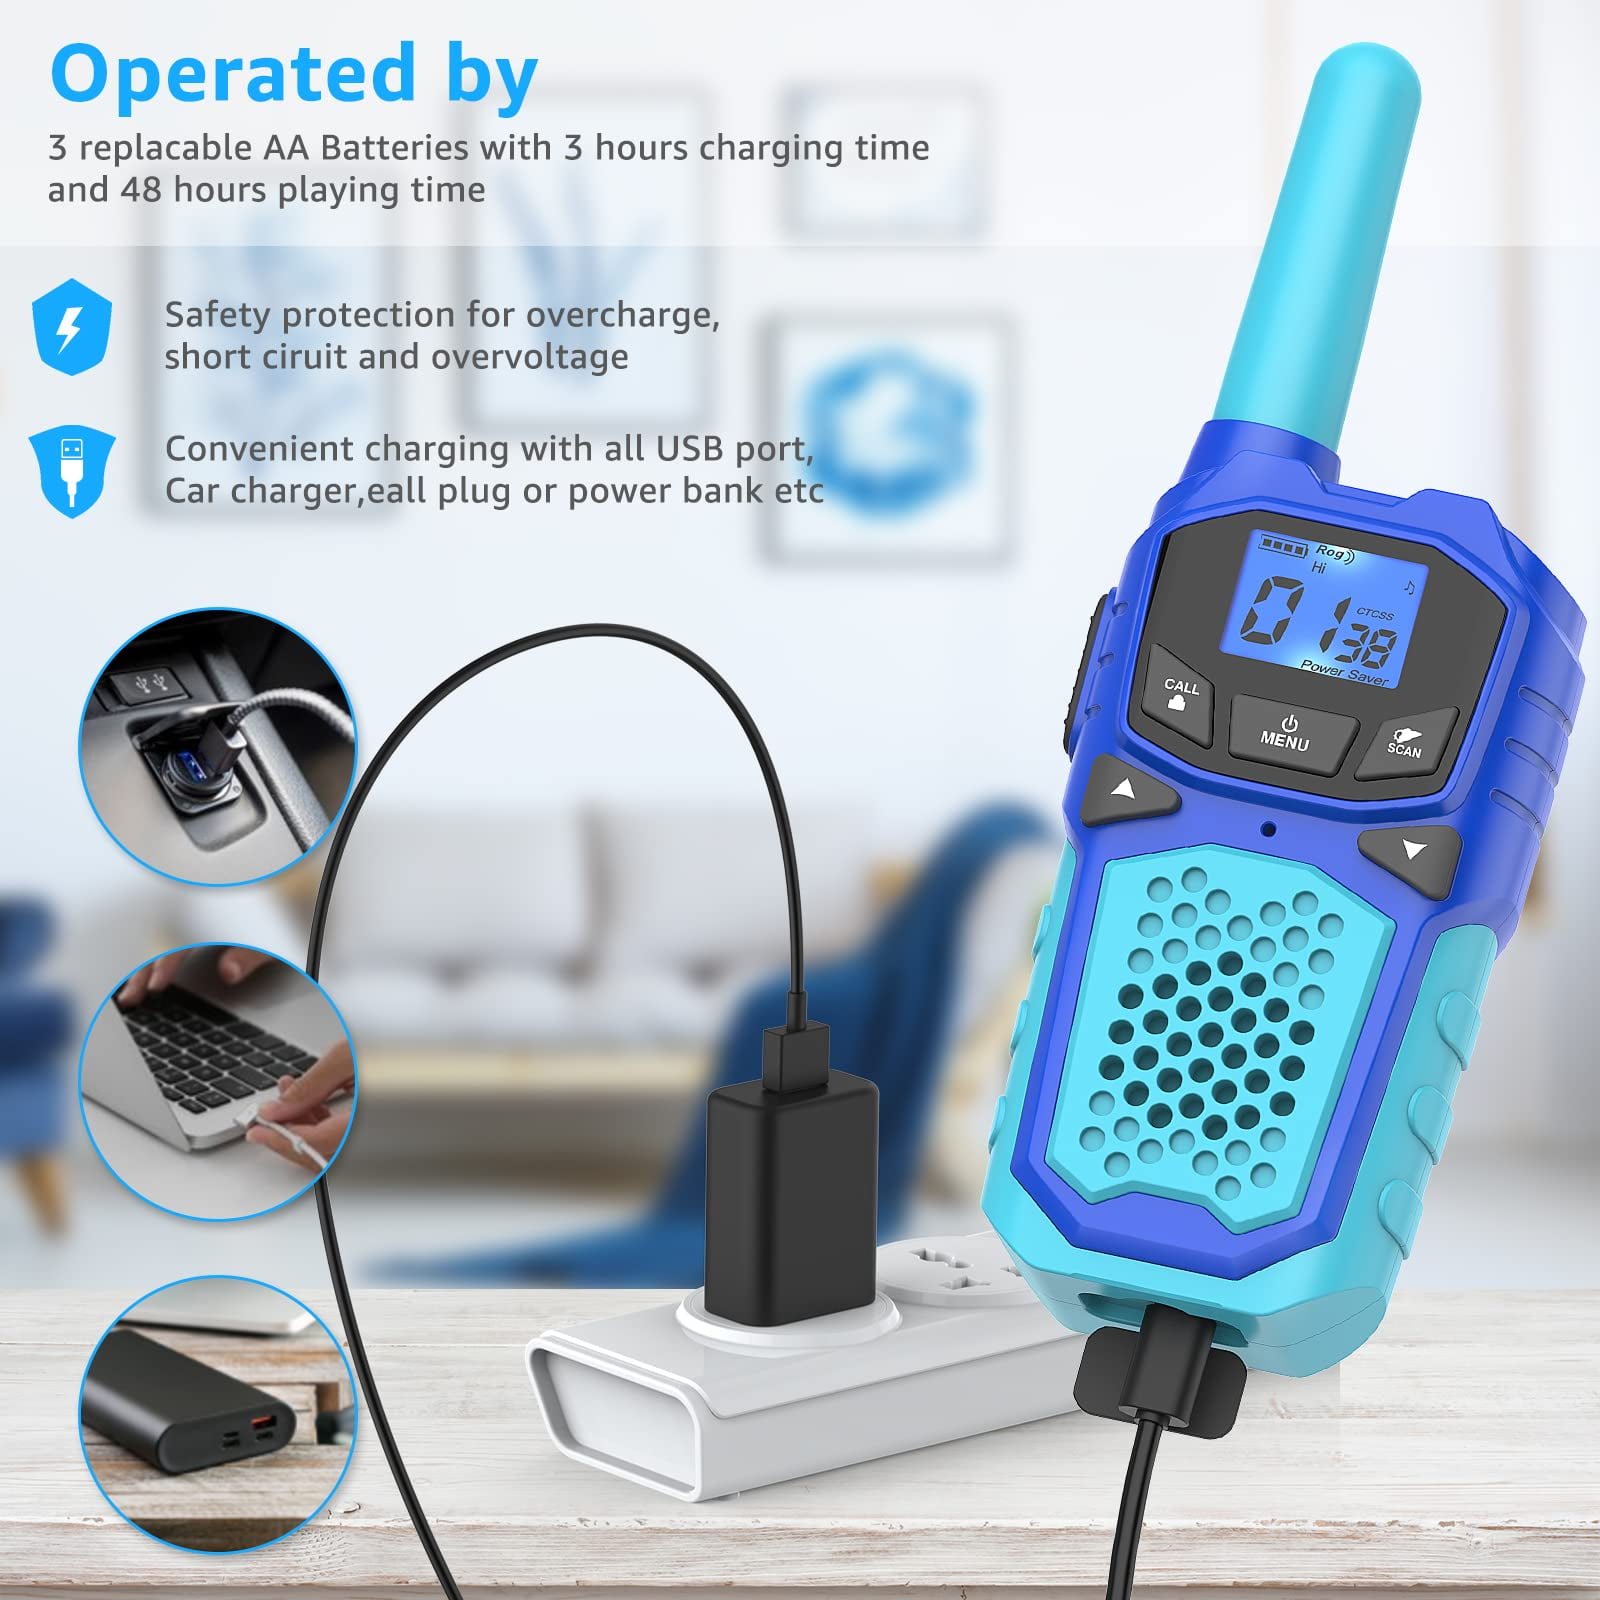 Walkie Talkies for Kids Pack, Rechargeable Walkie Talky Long Range for Adults  Handheld Two Way Radios Outdoor Toys for Boys Girls Camping, Hiking,  Hunting,Cruise Ship